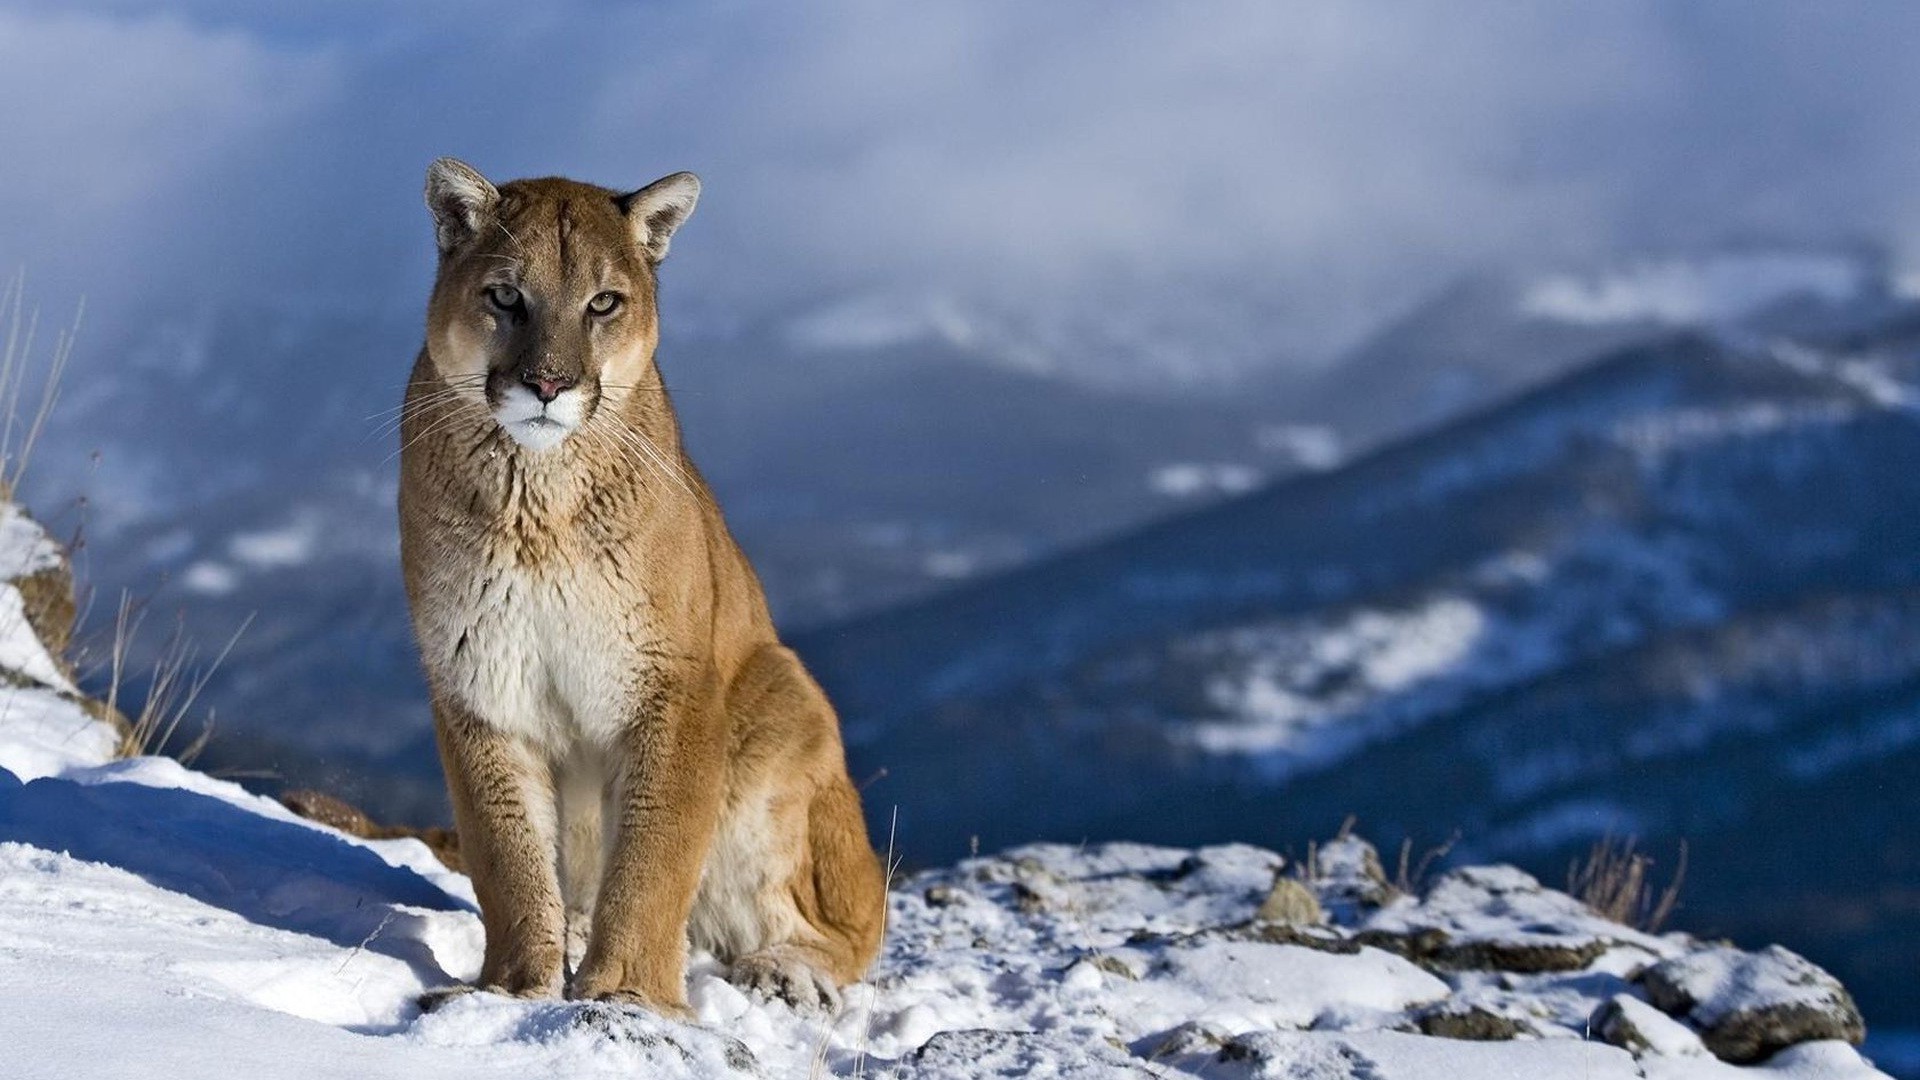 Mountain, Snow, Nature, Pumas Wallpapers HD / Desktop and Mobile Backgrounds